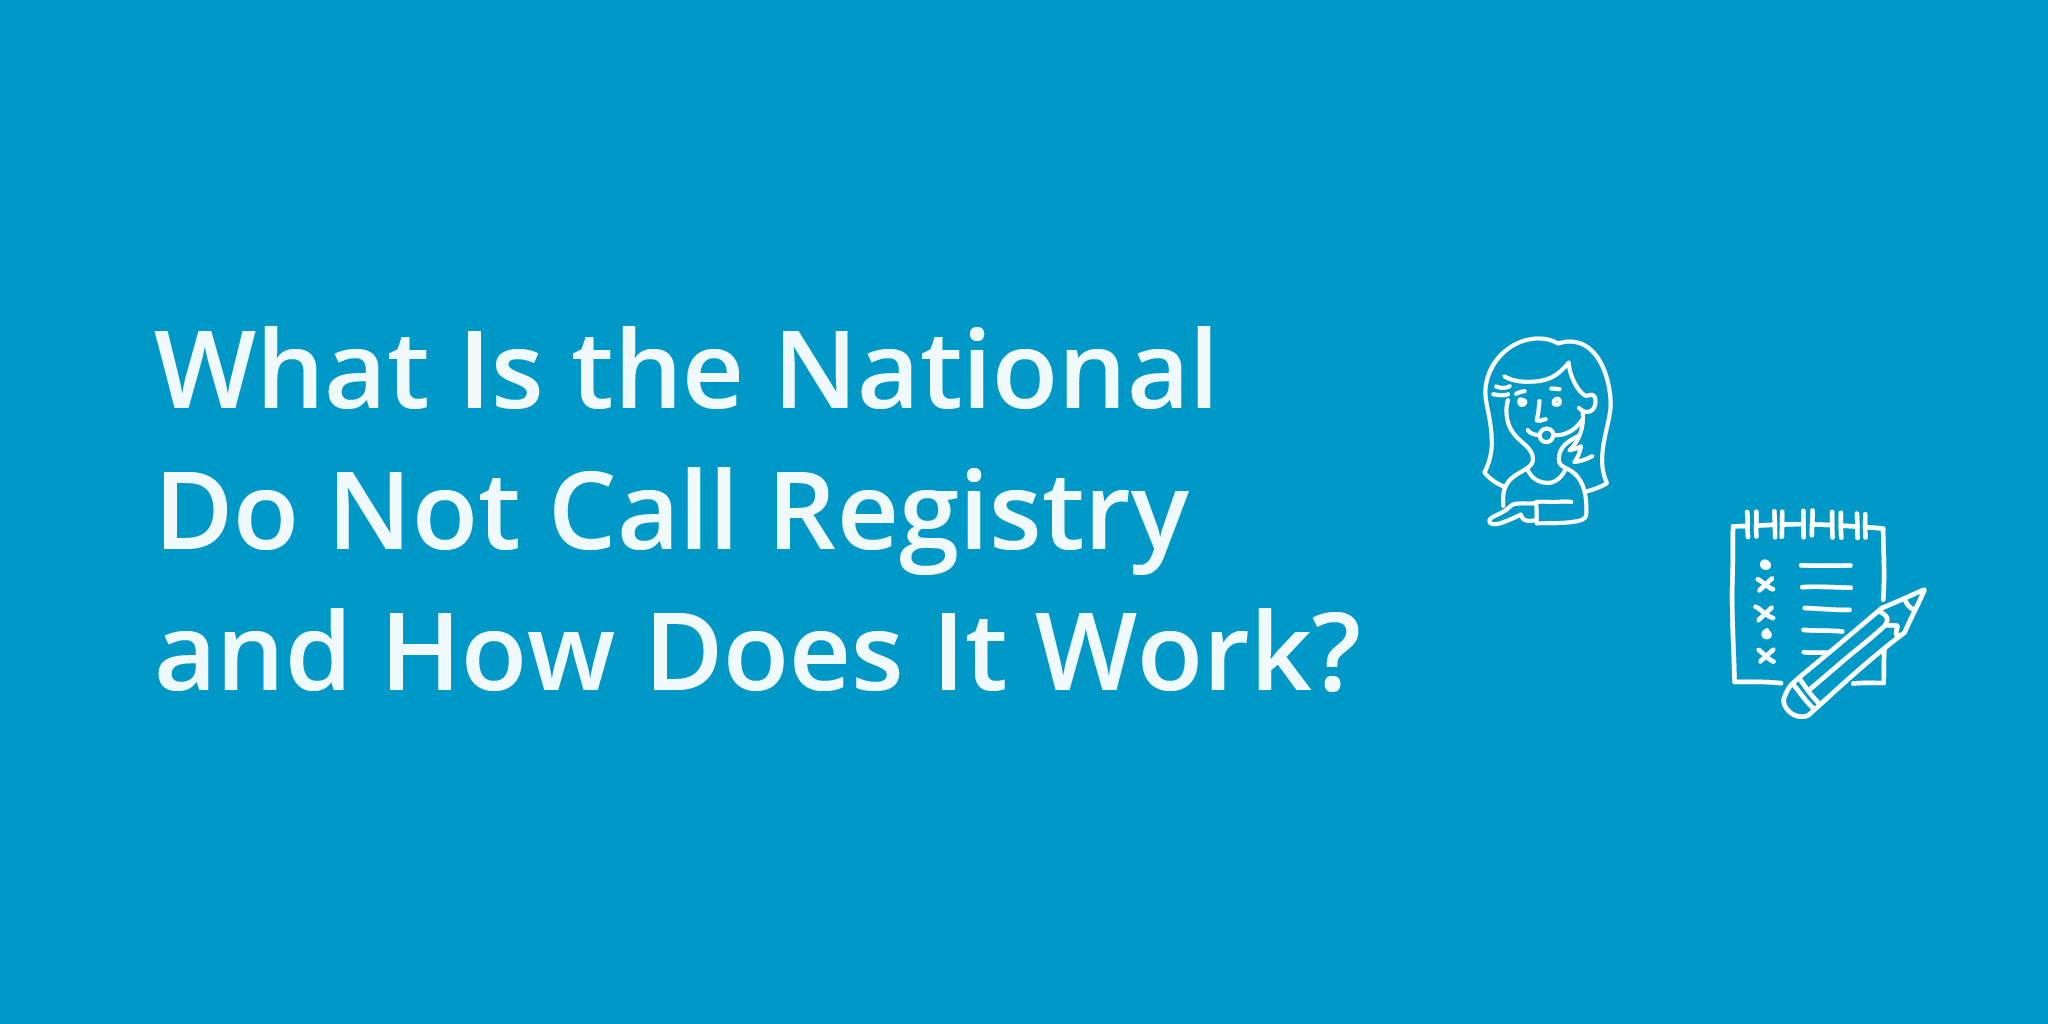 What Is the National Do Not Call Registry and How Does It Work?